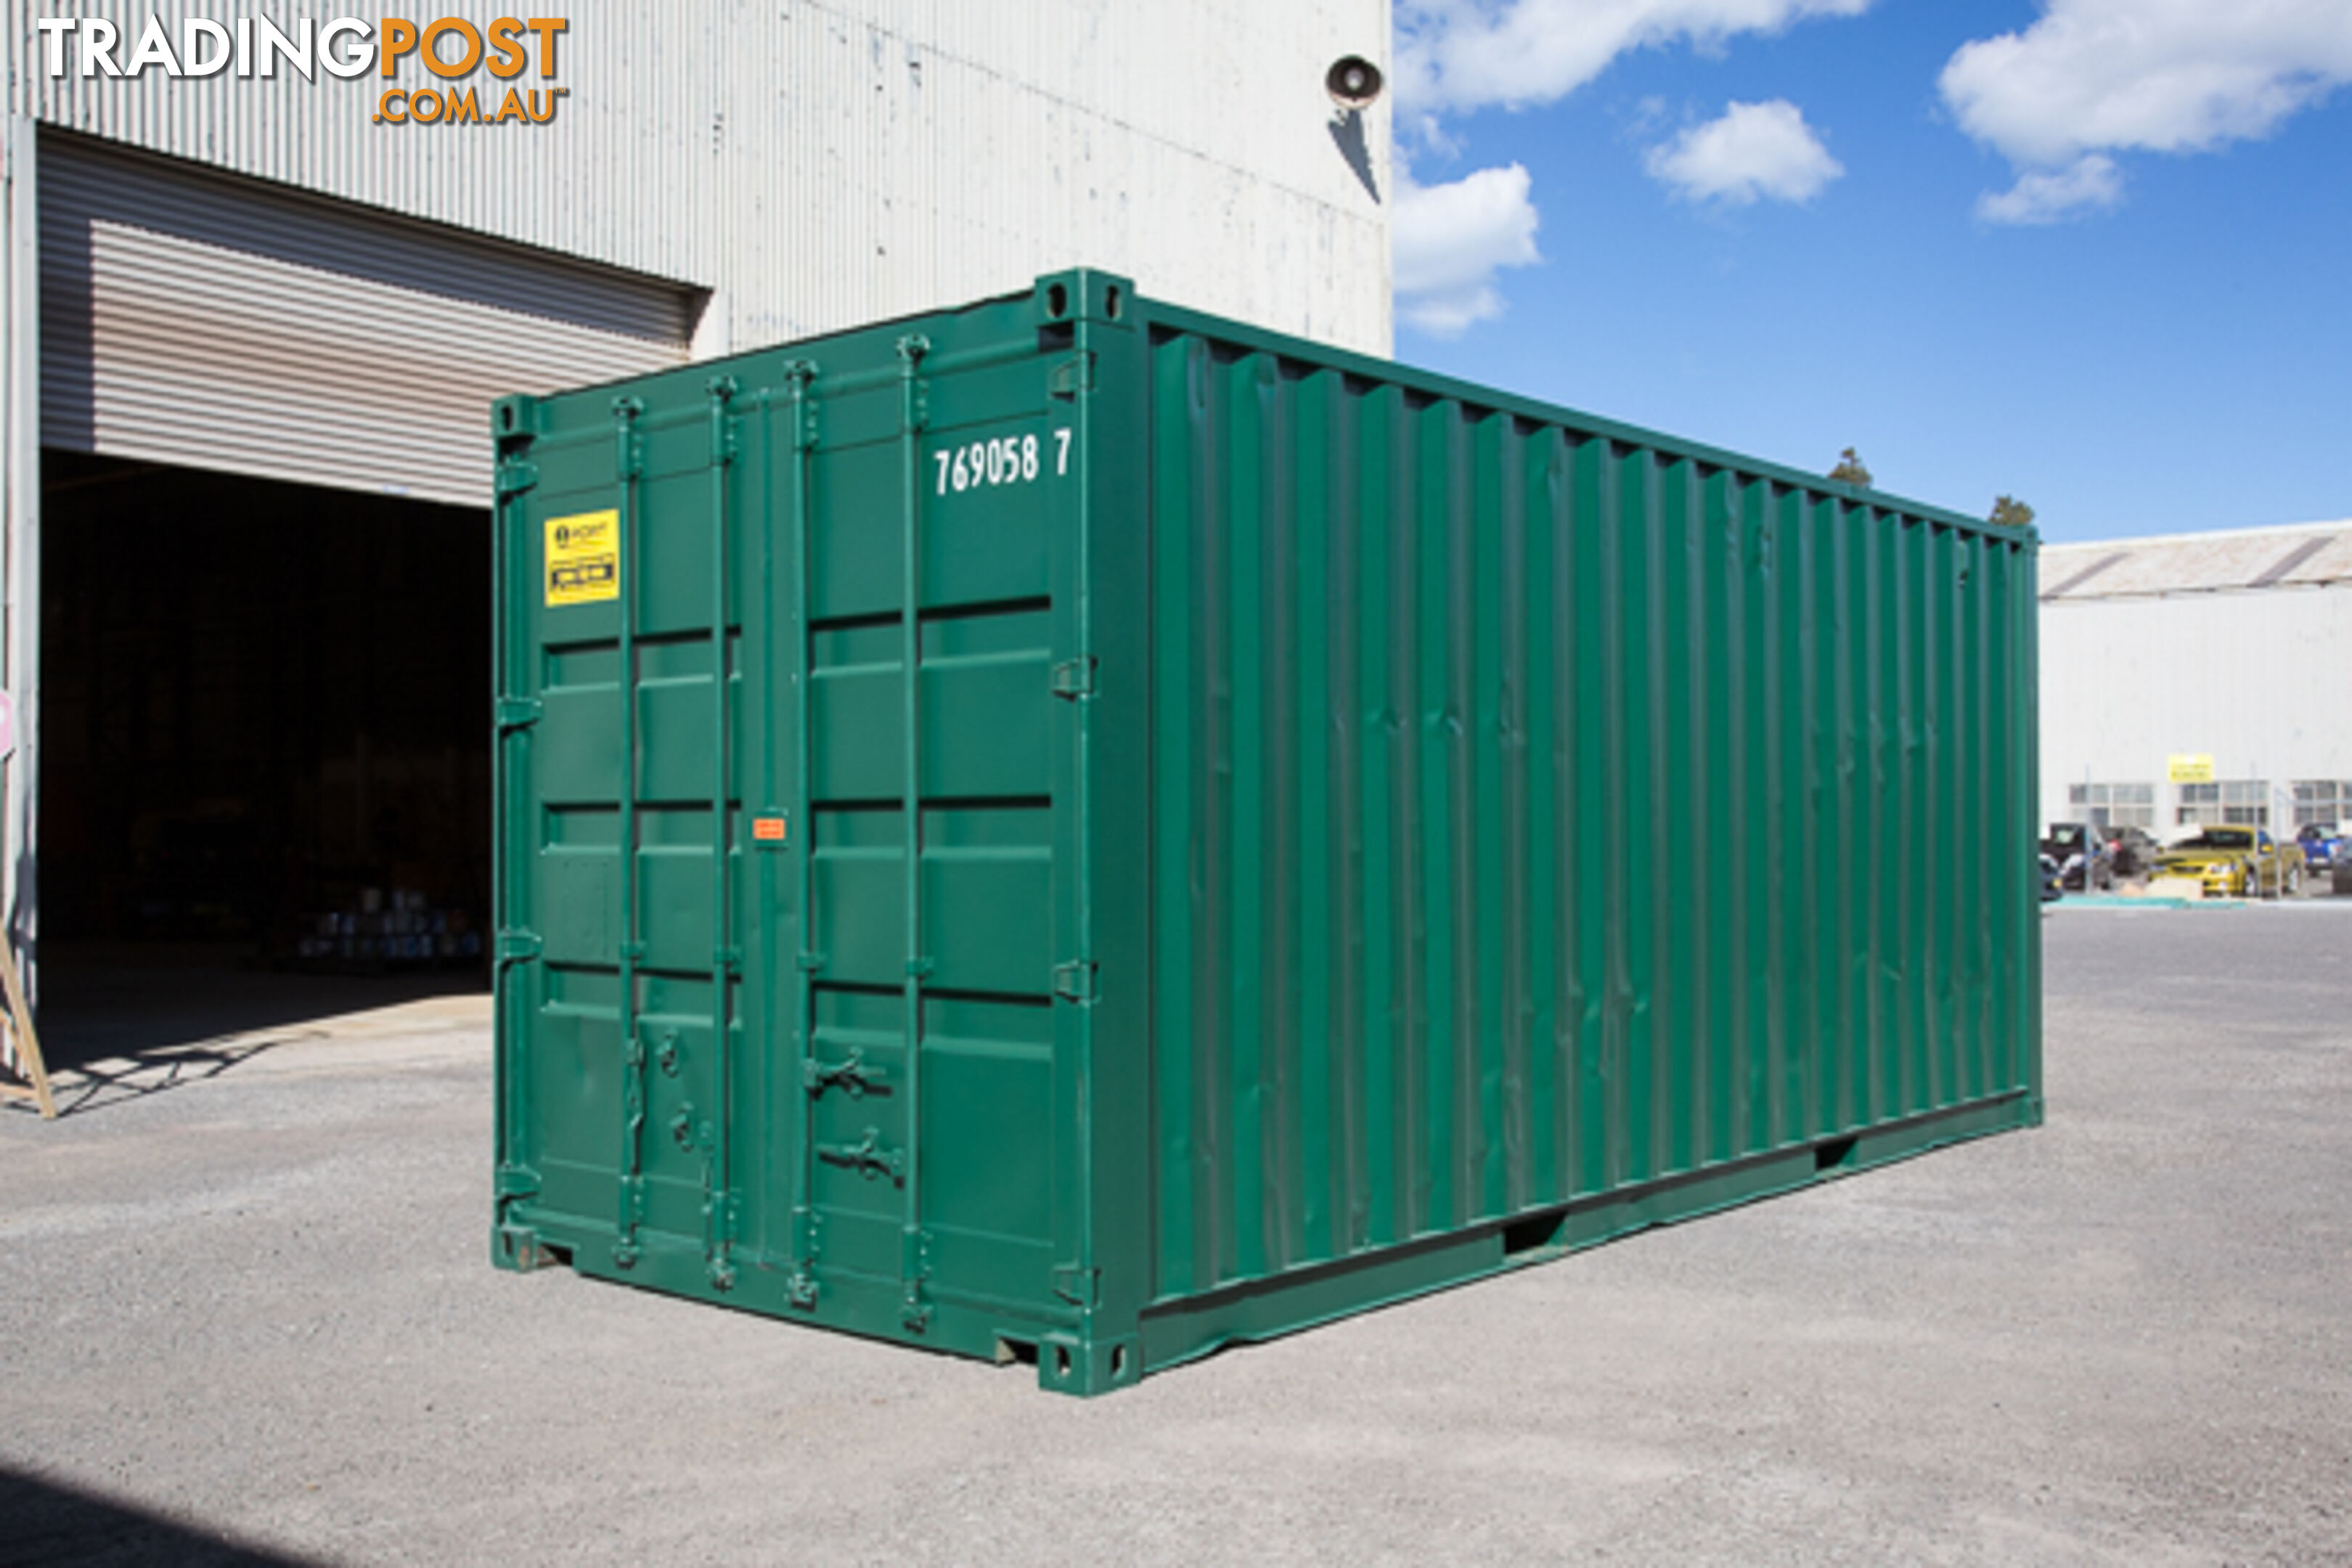 Refurbished Painted 20ft Shipping Containers Port Lincoln - From $4500 + GST